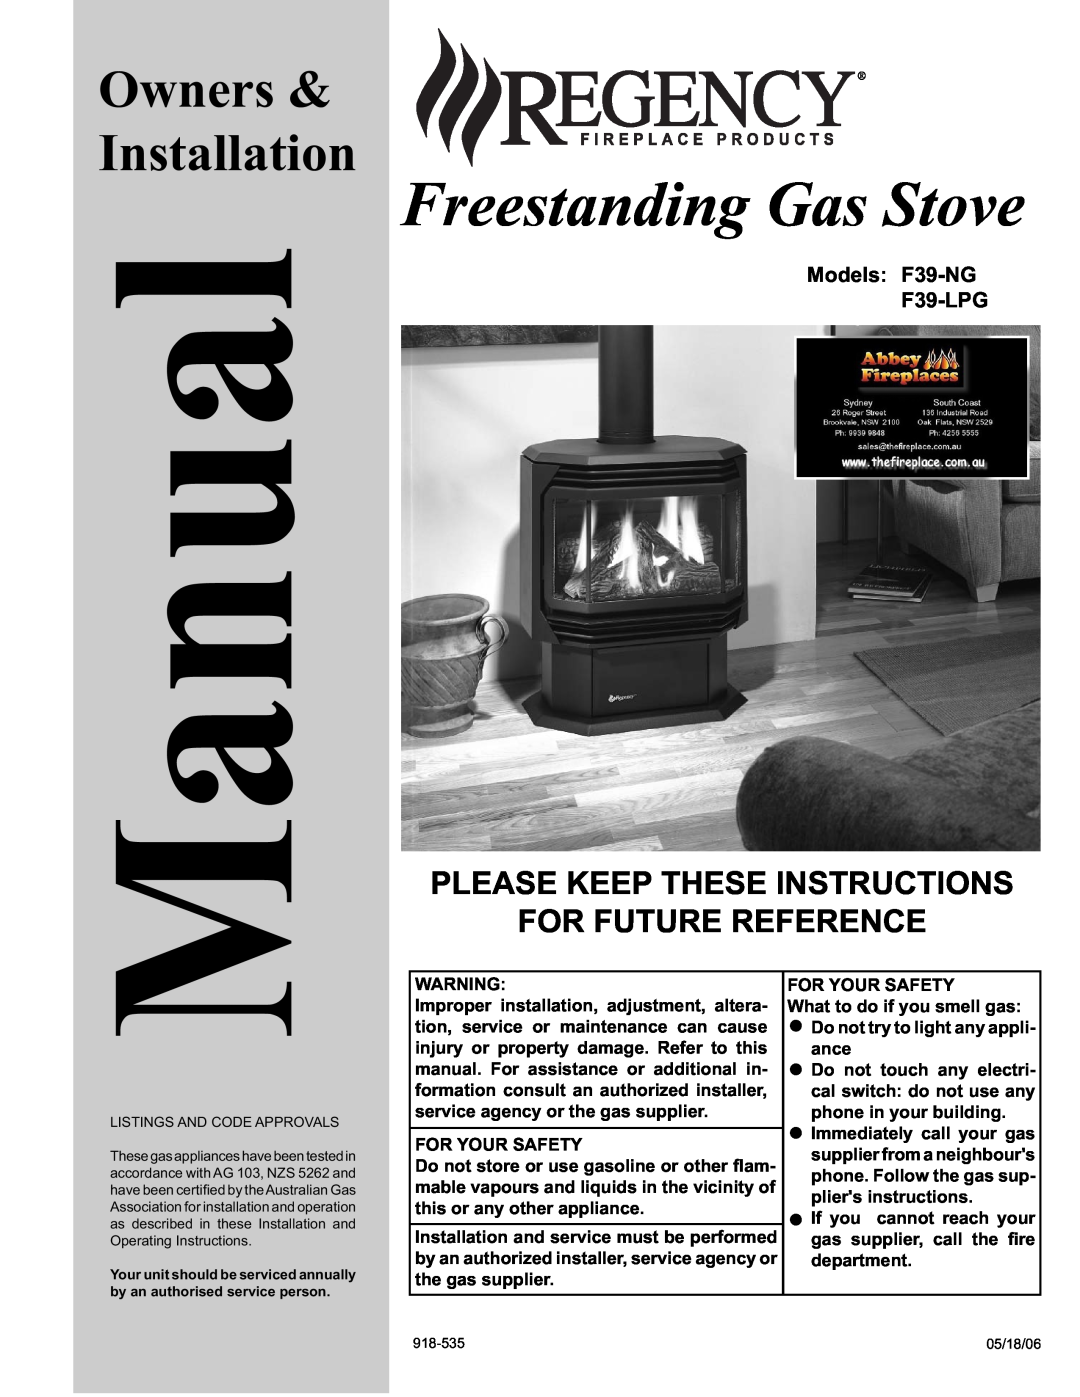 Regency installation manual Please Keep These Instructions, For Future Reference, Models F39-NG F39-LPG, Manual 